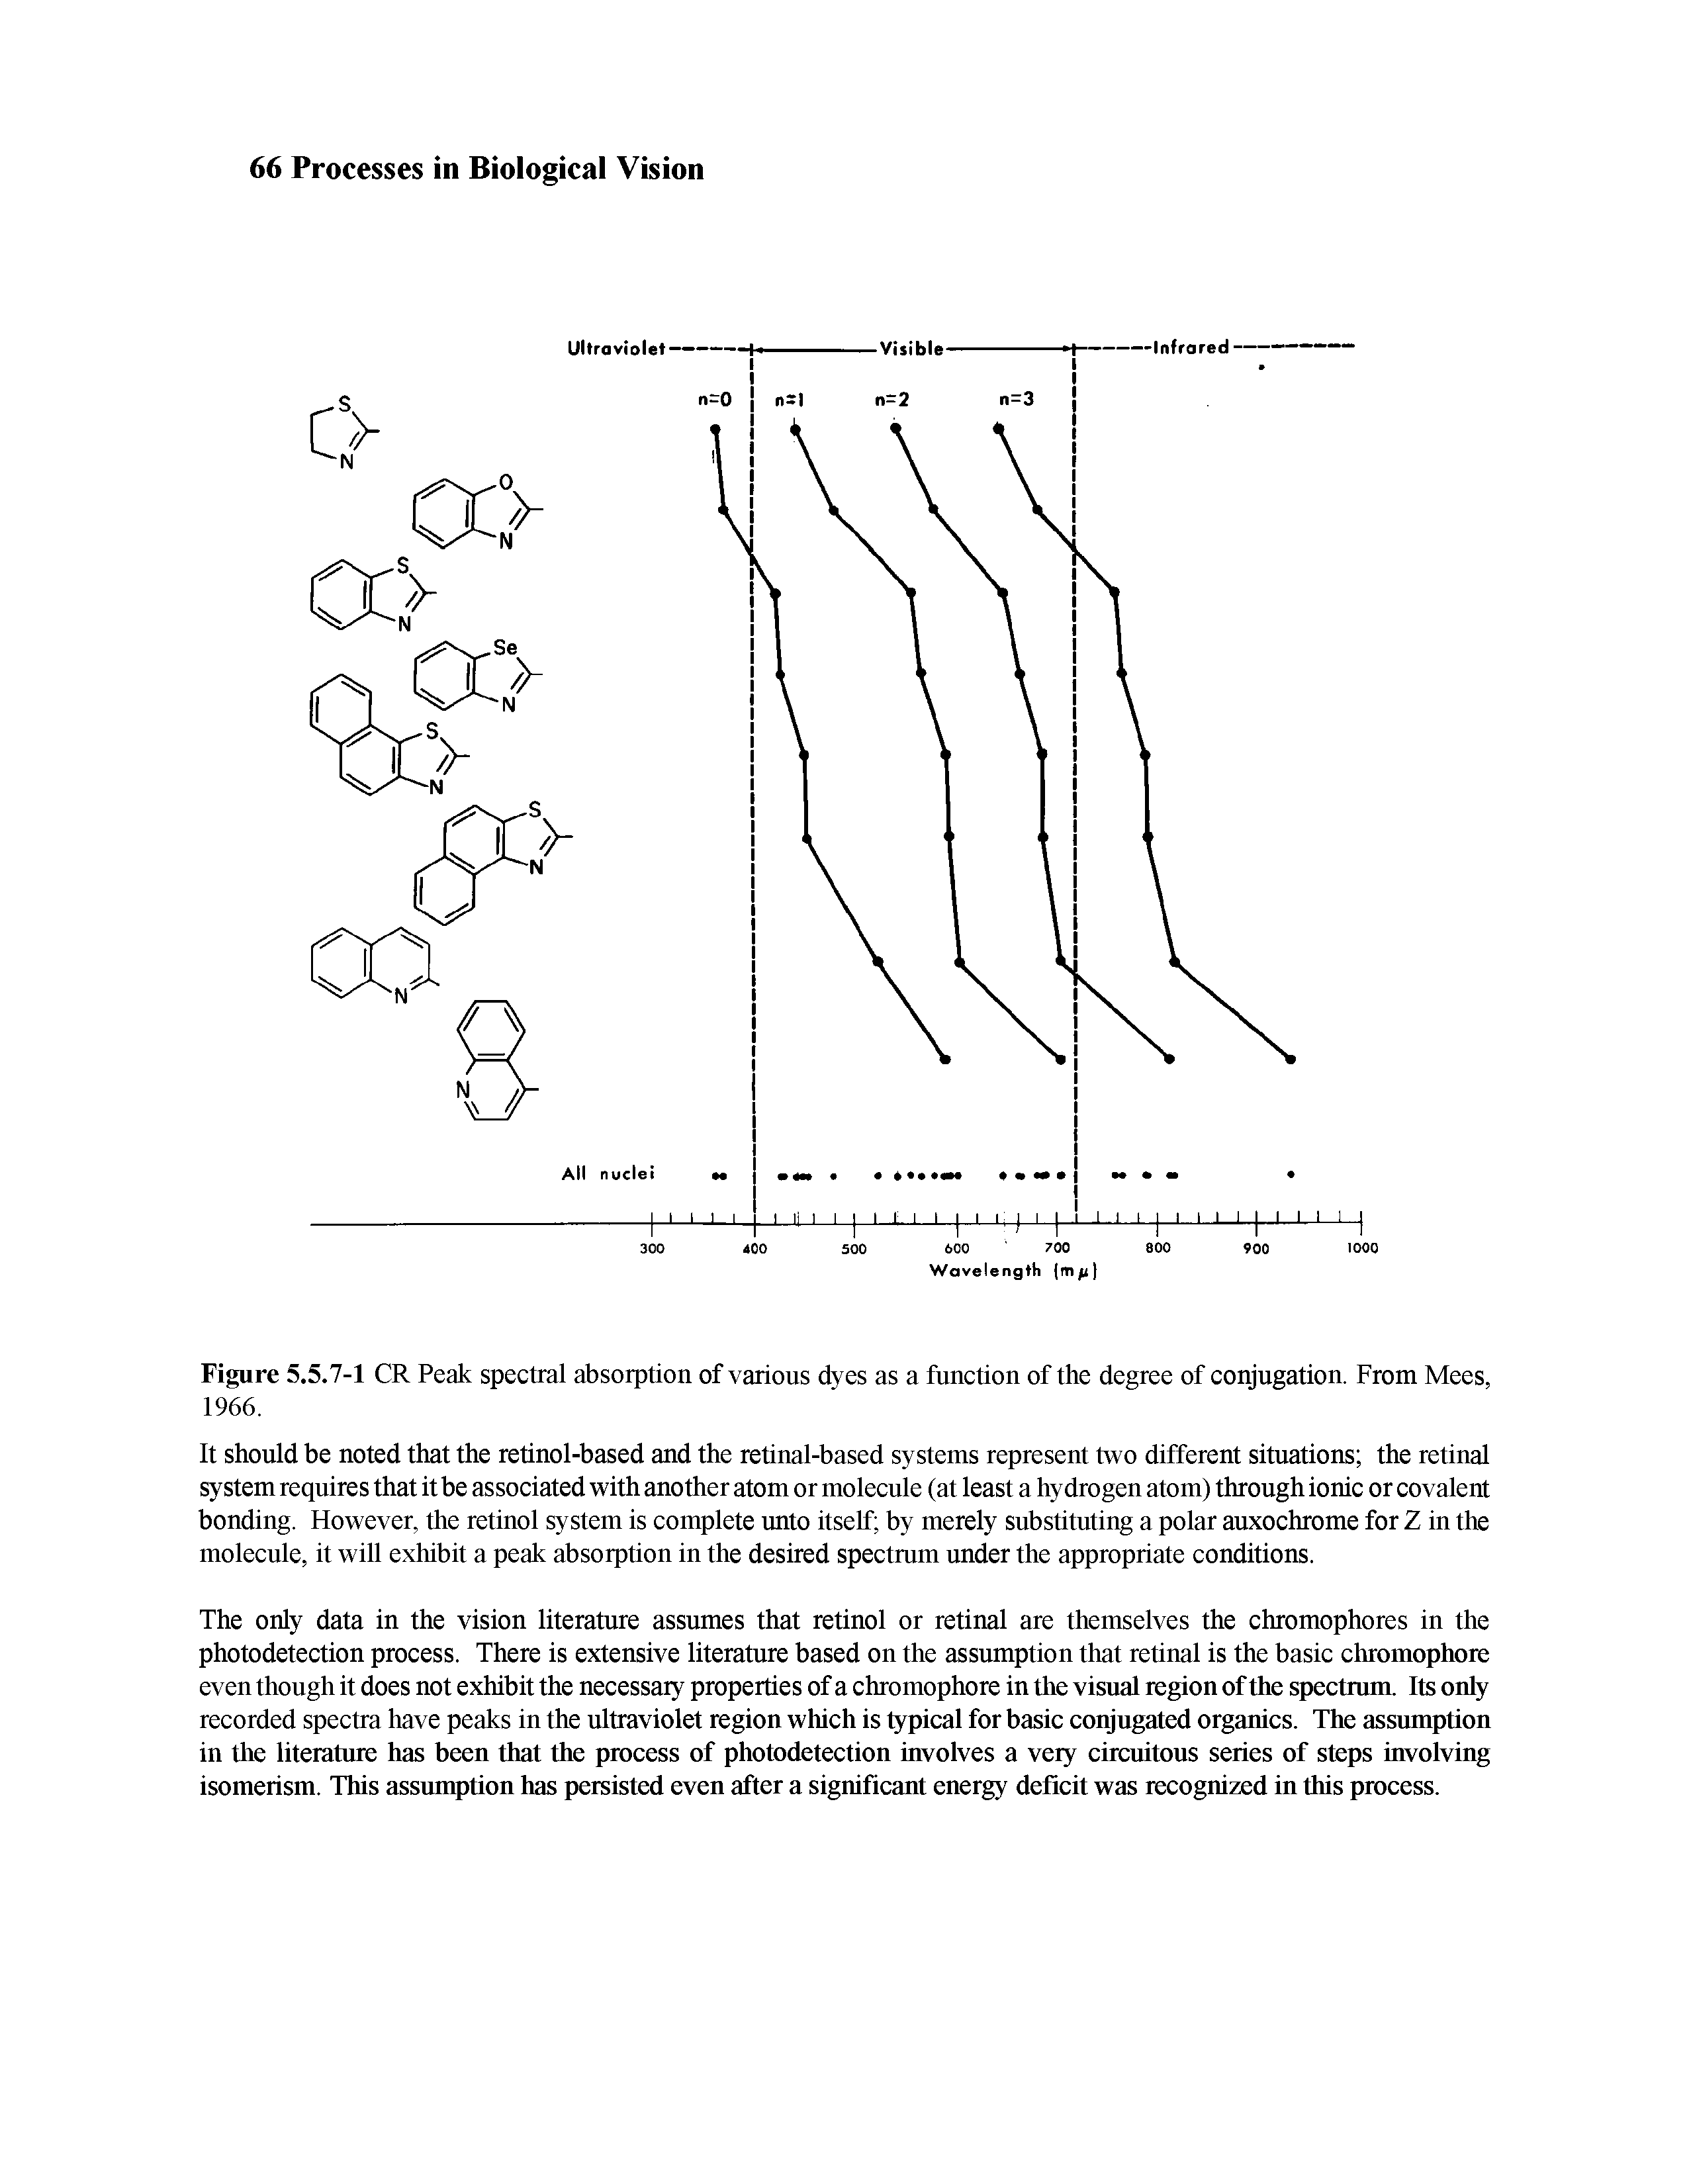 Figure 5.5.7-1 CR Peak spectral absorption of various dyes as a function of the degree of conjugation. From Mees, 1966.